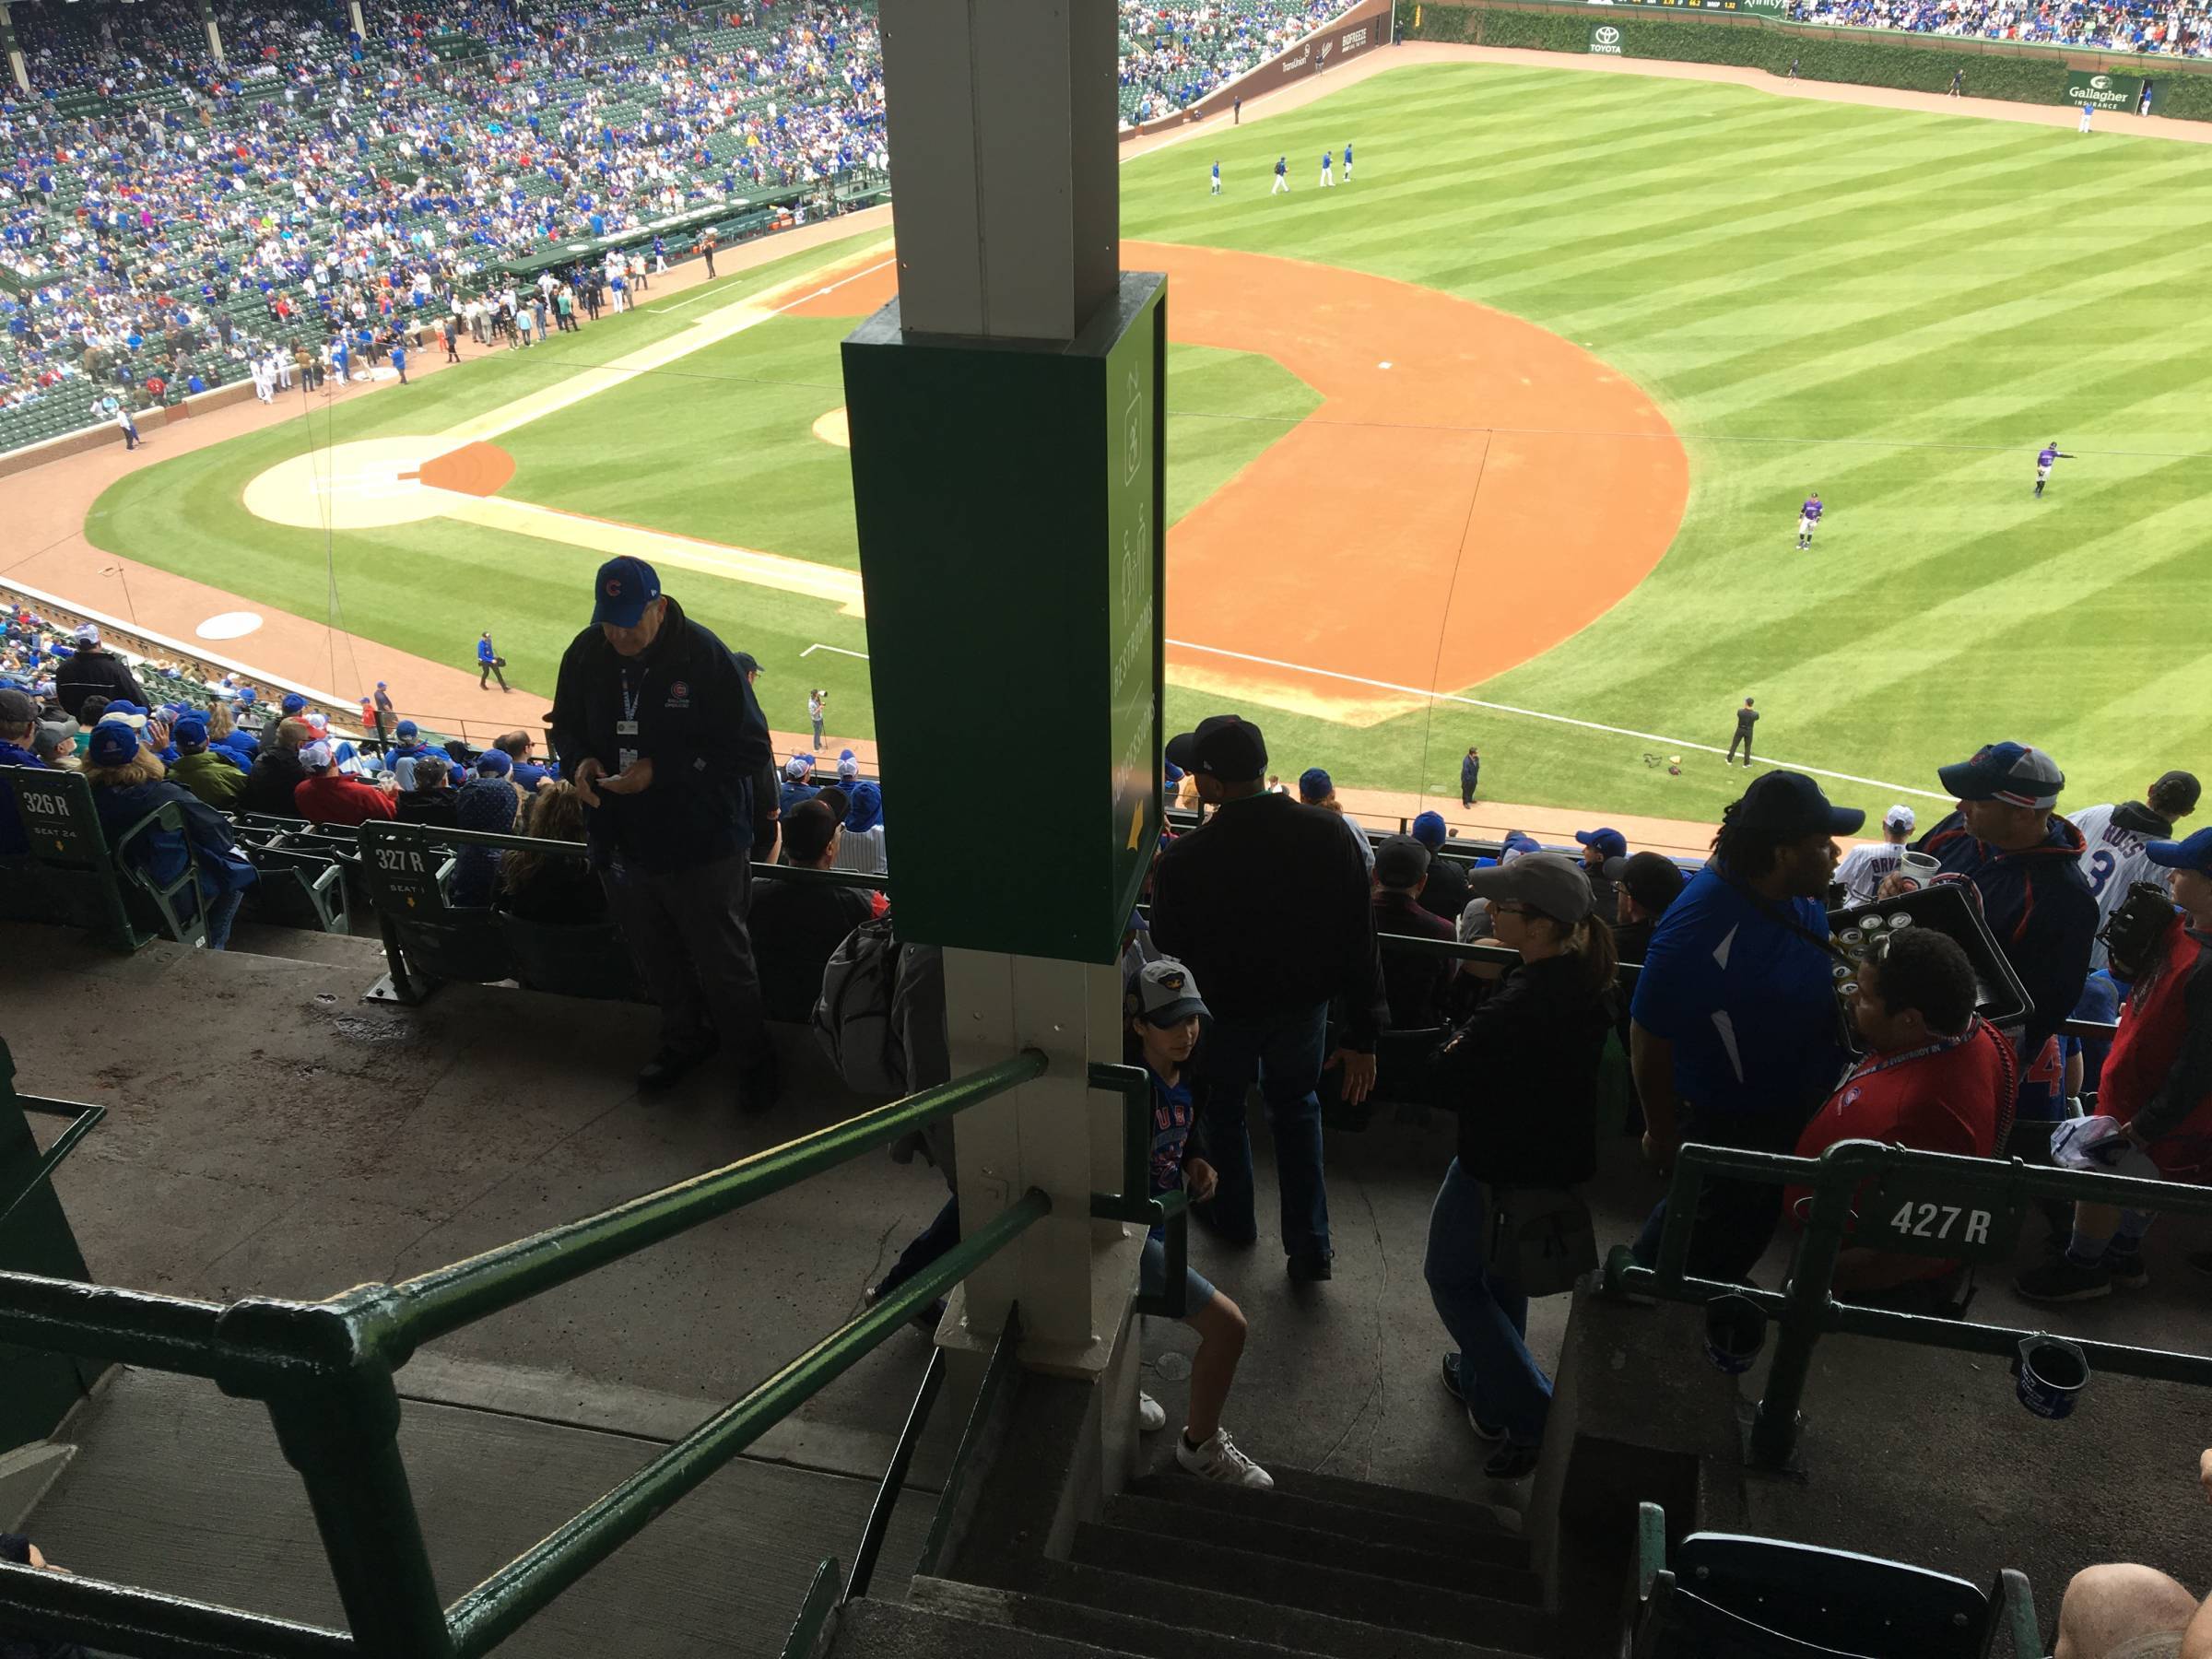 Pole in Section 426R at Wrigley Field